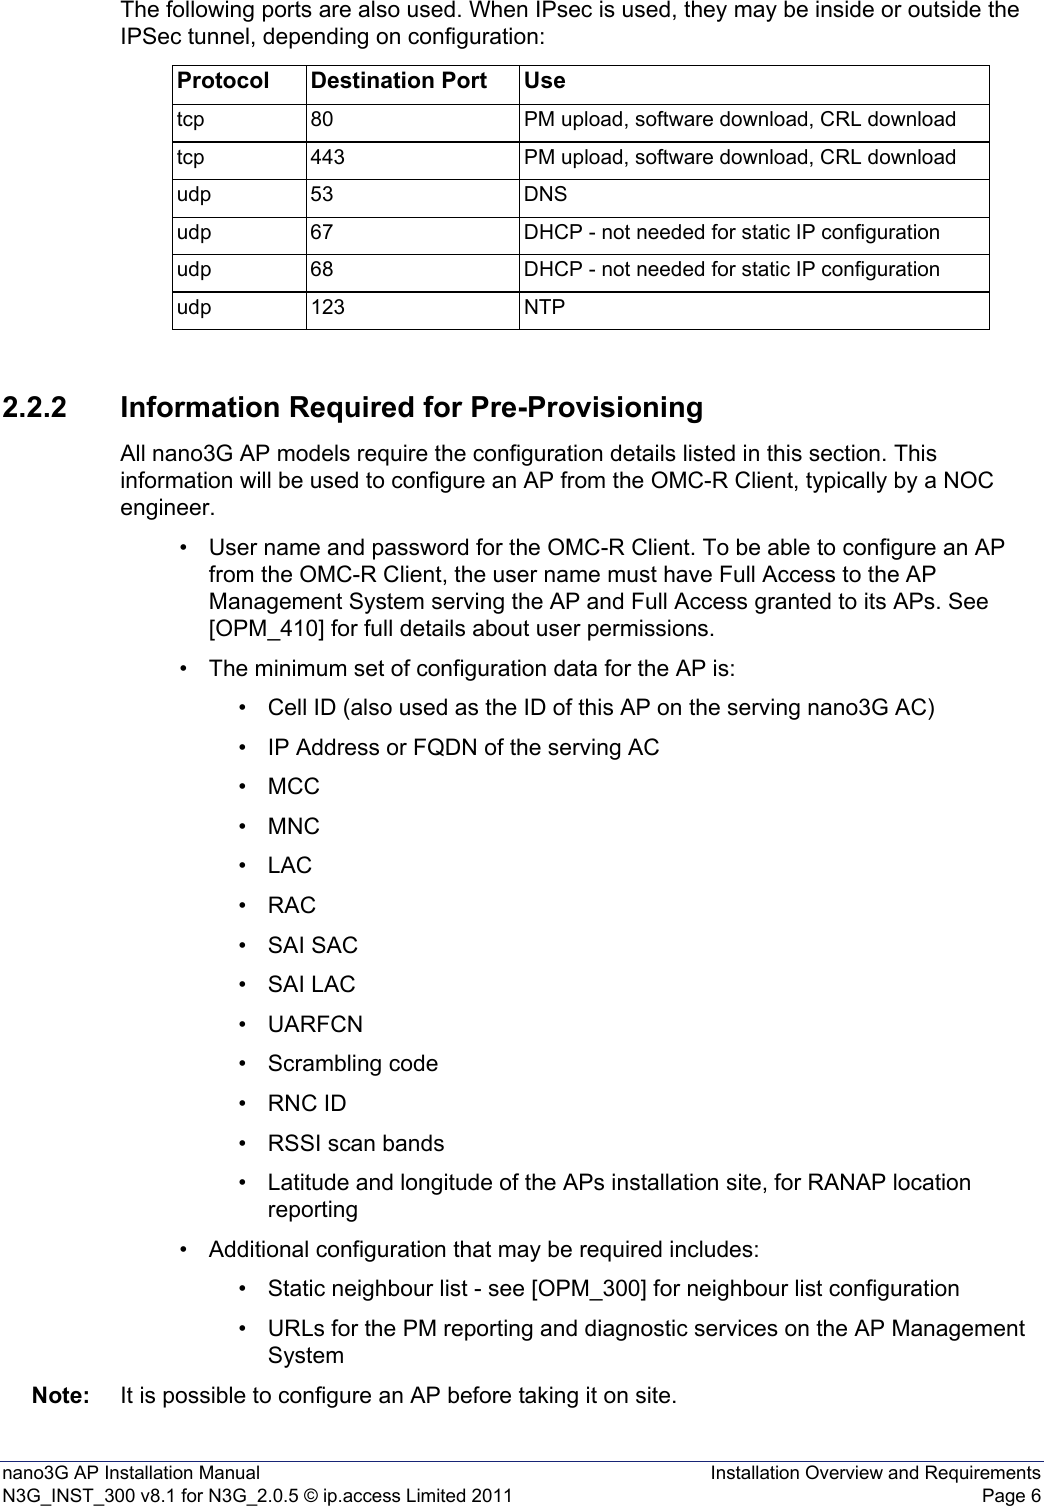 nano3G AP Installation Manual Installation Overview and RequirementsN3G_INST_300 v8.1 for N3G_2.0.5 © ip.access Limited 2011 Page 6The following ports are also used. When IPsec is used, they may be inside or outside the IPSec tunnel, depending on configuration:2.2.2 Information Required for Pre-ProvisioningAll nano3G AP models require the configuration details listed in this section. This information will be used to configure an AP from the OMC-R Client, typically by a NOC engineer. • User name and password for the OMC-R Client. To be able to configure an AP from the OMC-R Client, the user name must have Full Access to the AP Management System serving the AP and Full Access granted to its APs. See [OPM_410] for full details about user permissions.• The minimum set of configuration data for the AP is:• Cell ID (also used as the ID of this AP on the serving nano3G AC)• IP Address or FQDN of the serving AC• MCC •MNC•LAC•RAC•SAI SAC•SAI LAC•UARFCN• Scrambling code• RNC ID• RSSI scan bands• Latitude and longitude of the APs installation site, for RANAP location reporting• Additional configuration that may be required includes:• Static neighbour list - see [OPM_300] for neighbour list configuration• URLs for the PM reporting and diagnostic services on the AP Management SystemNote: It is possible to configure an AP before taking it on site. Protocol Destination Port Usetcp 80 PM upload, software download, CRL downloadtcp 443 PM upload, software download, CRL downloadudp 53 DNSudp 67 DHCP - not needed for static IP configurationudp 68 DHCP - not needed for static IP configurationudp 123 NTP